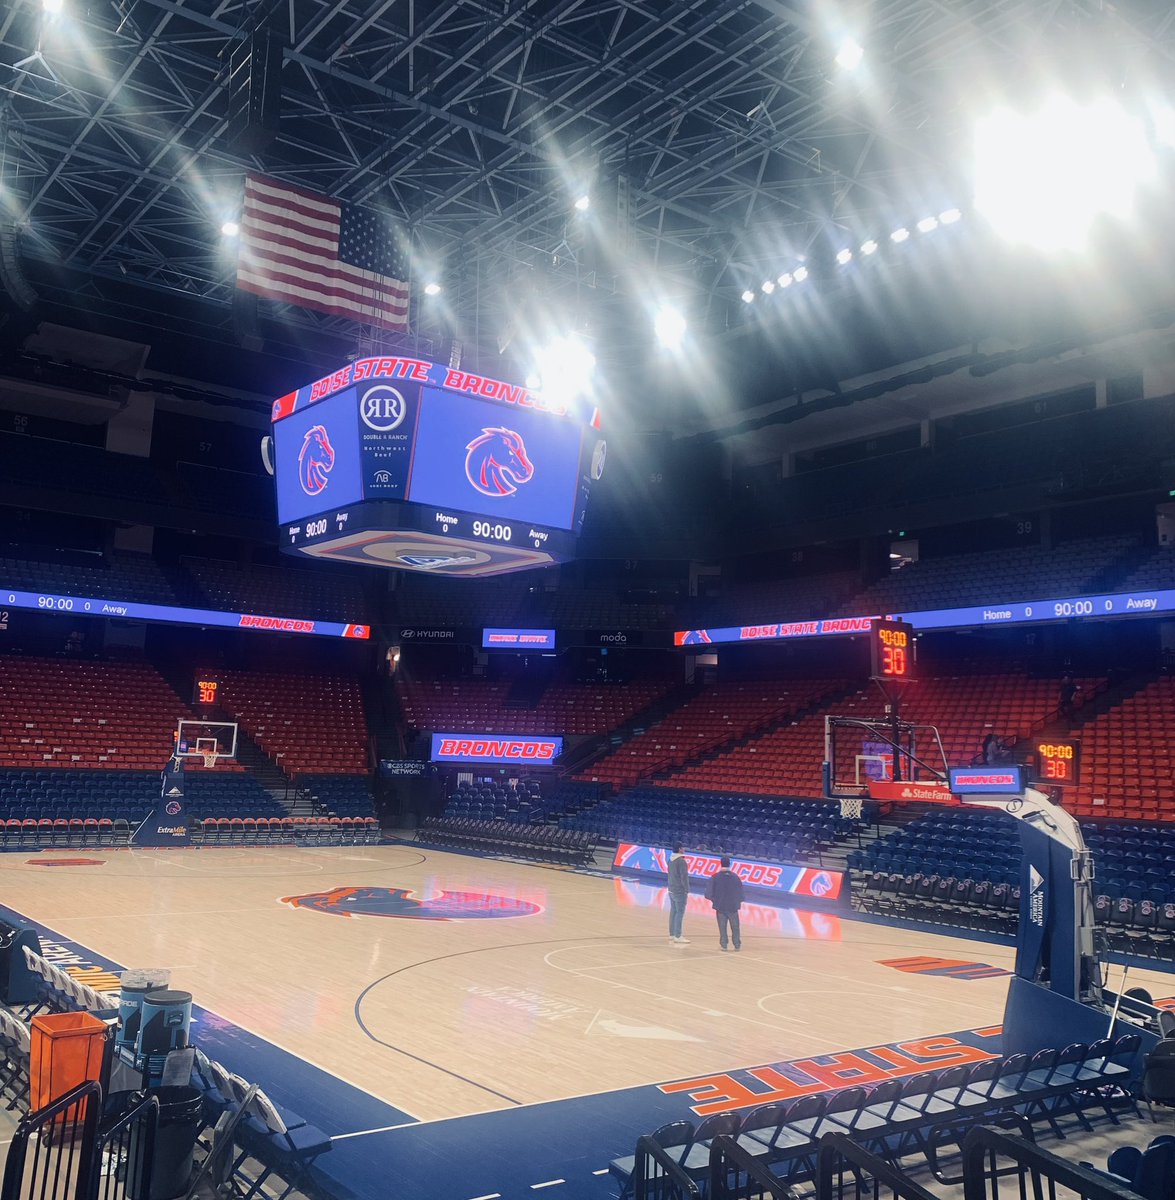 So close to showtime…can’t wait for all of The Nation to sprint through the doors! Don’t just come to watch the game tonight. Come to BE THE SHOW!

#BleedBlue #UnbreakableCulture